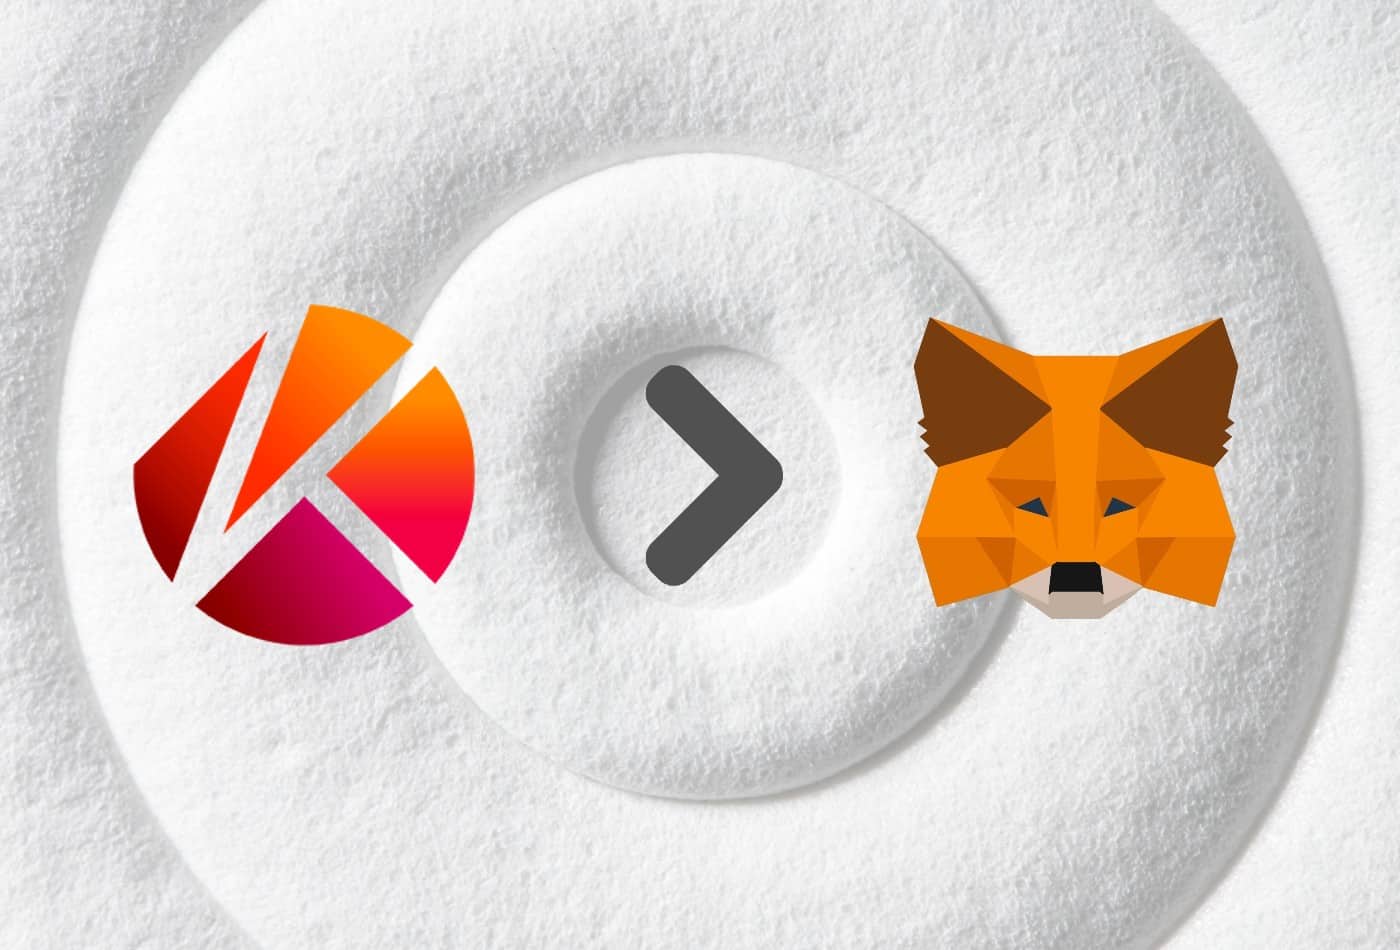 How To Add Klaytn (KLAY) To MetaMask – Image Guide